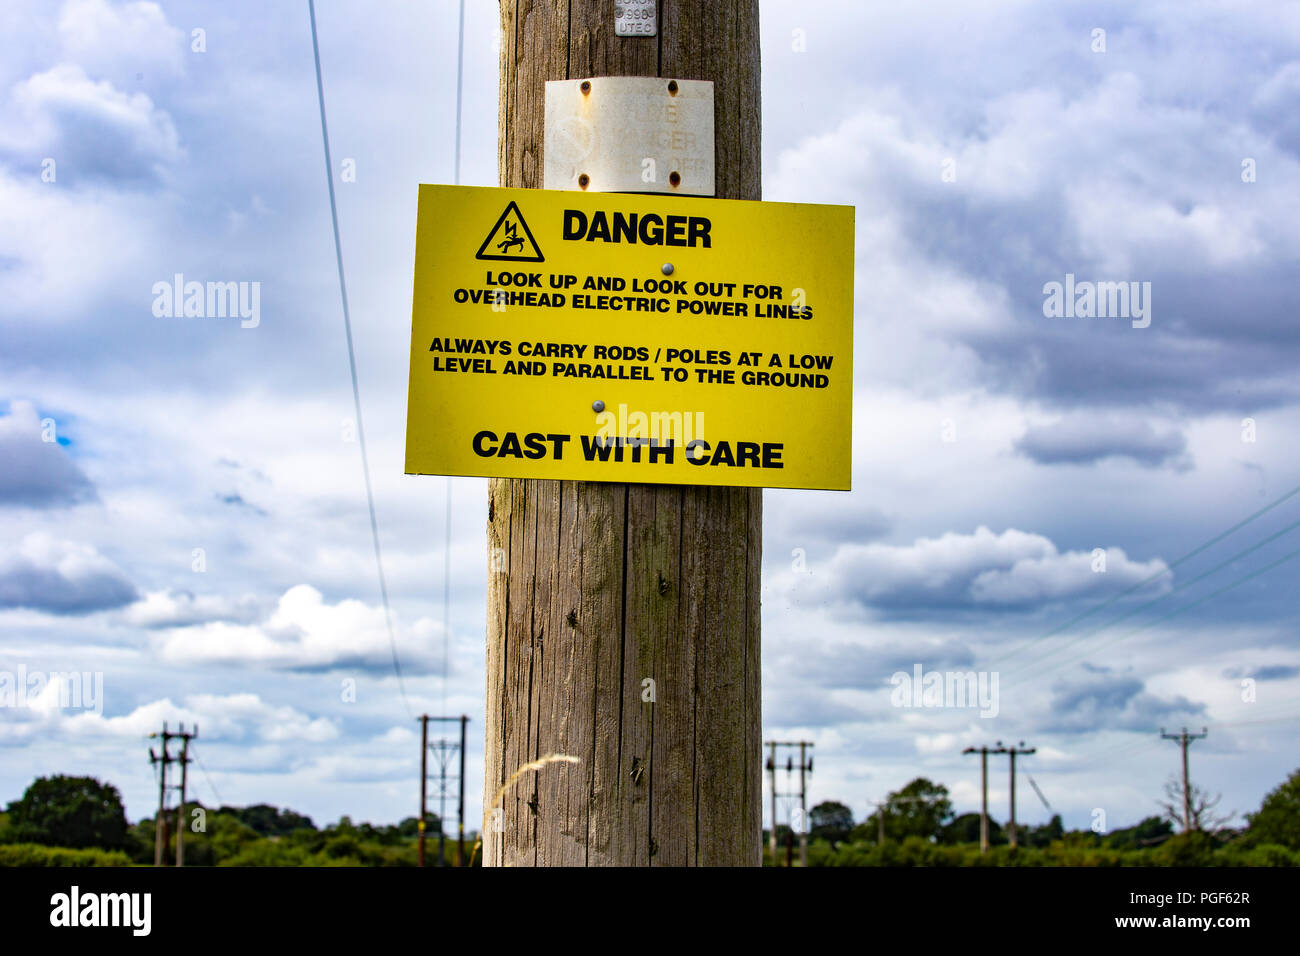 Cast with care danger sign for fishing people in Cheshire UK Stock Photo